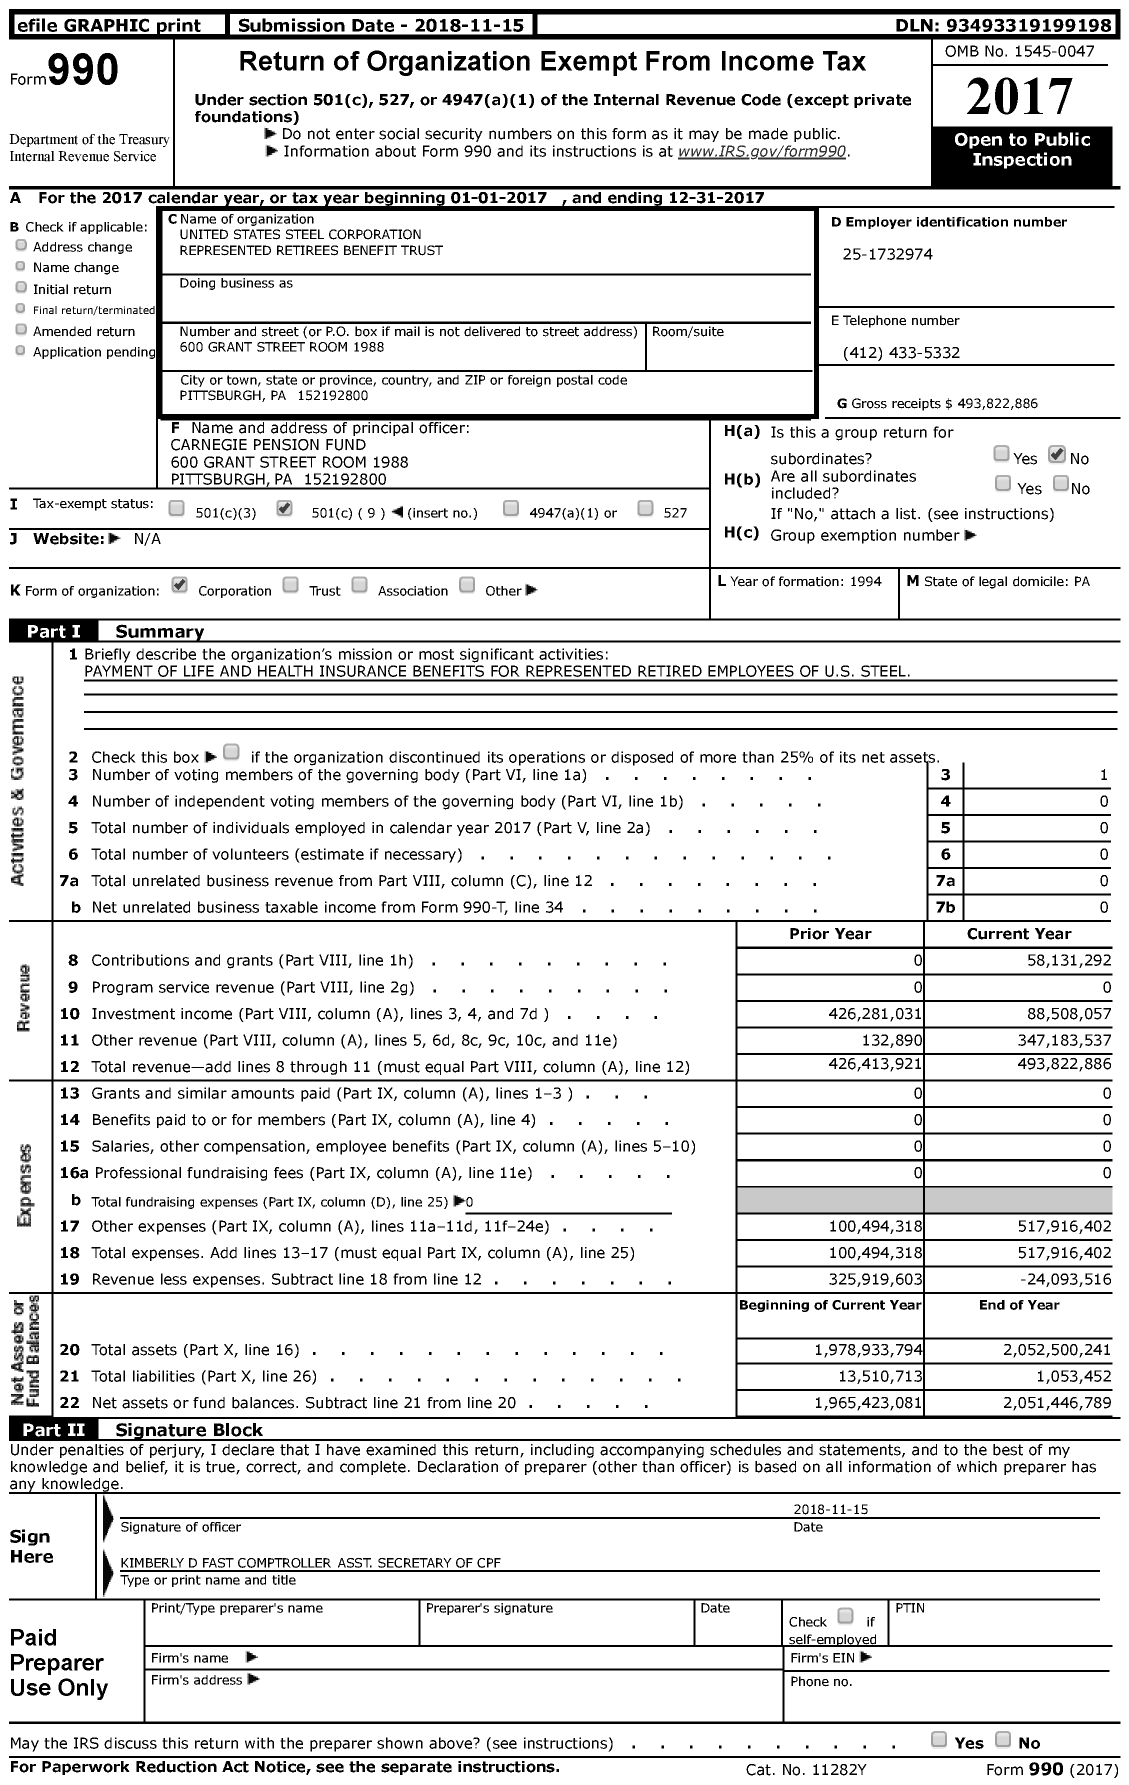 Image of first page of 2017 Form 990 for United States Steel Corporation Represented Retirees Benefit Trust